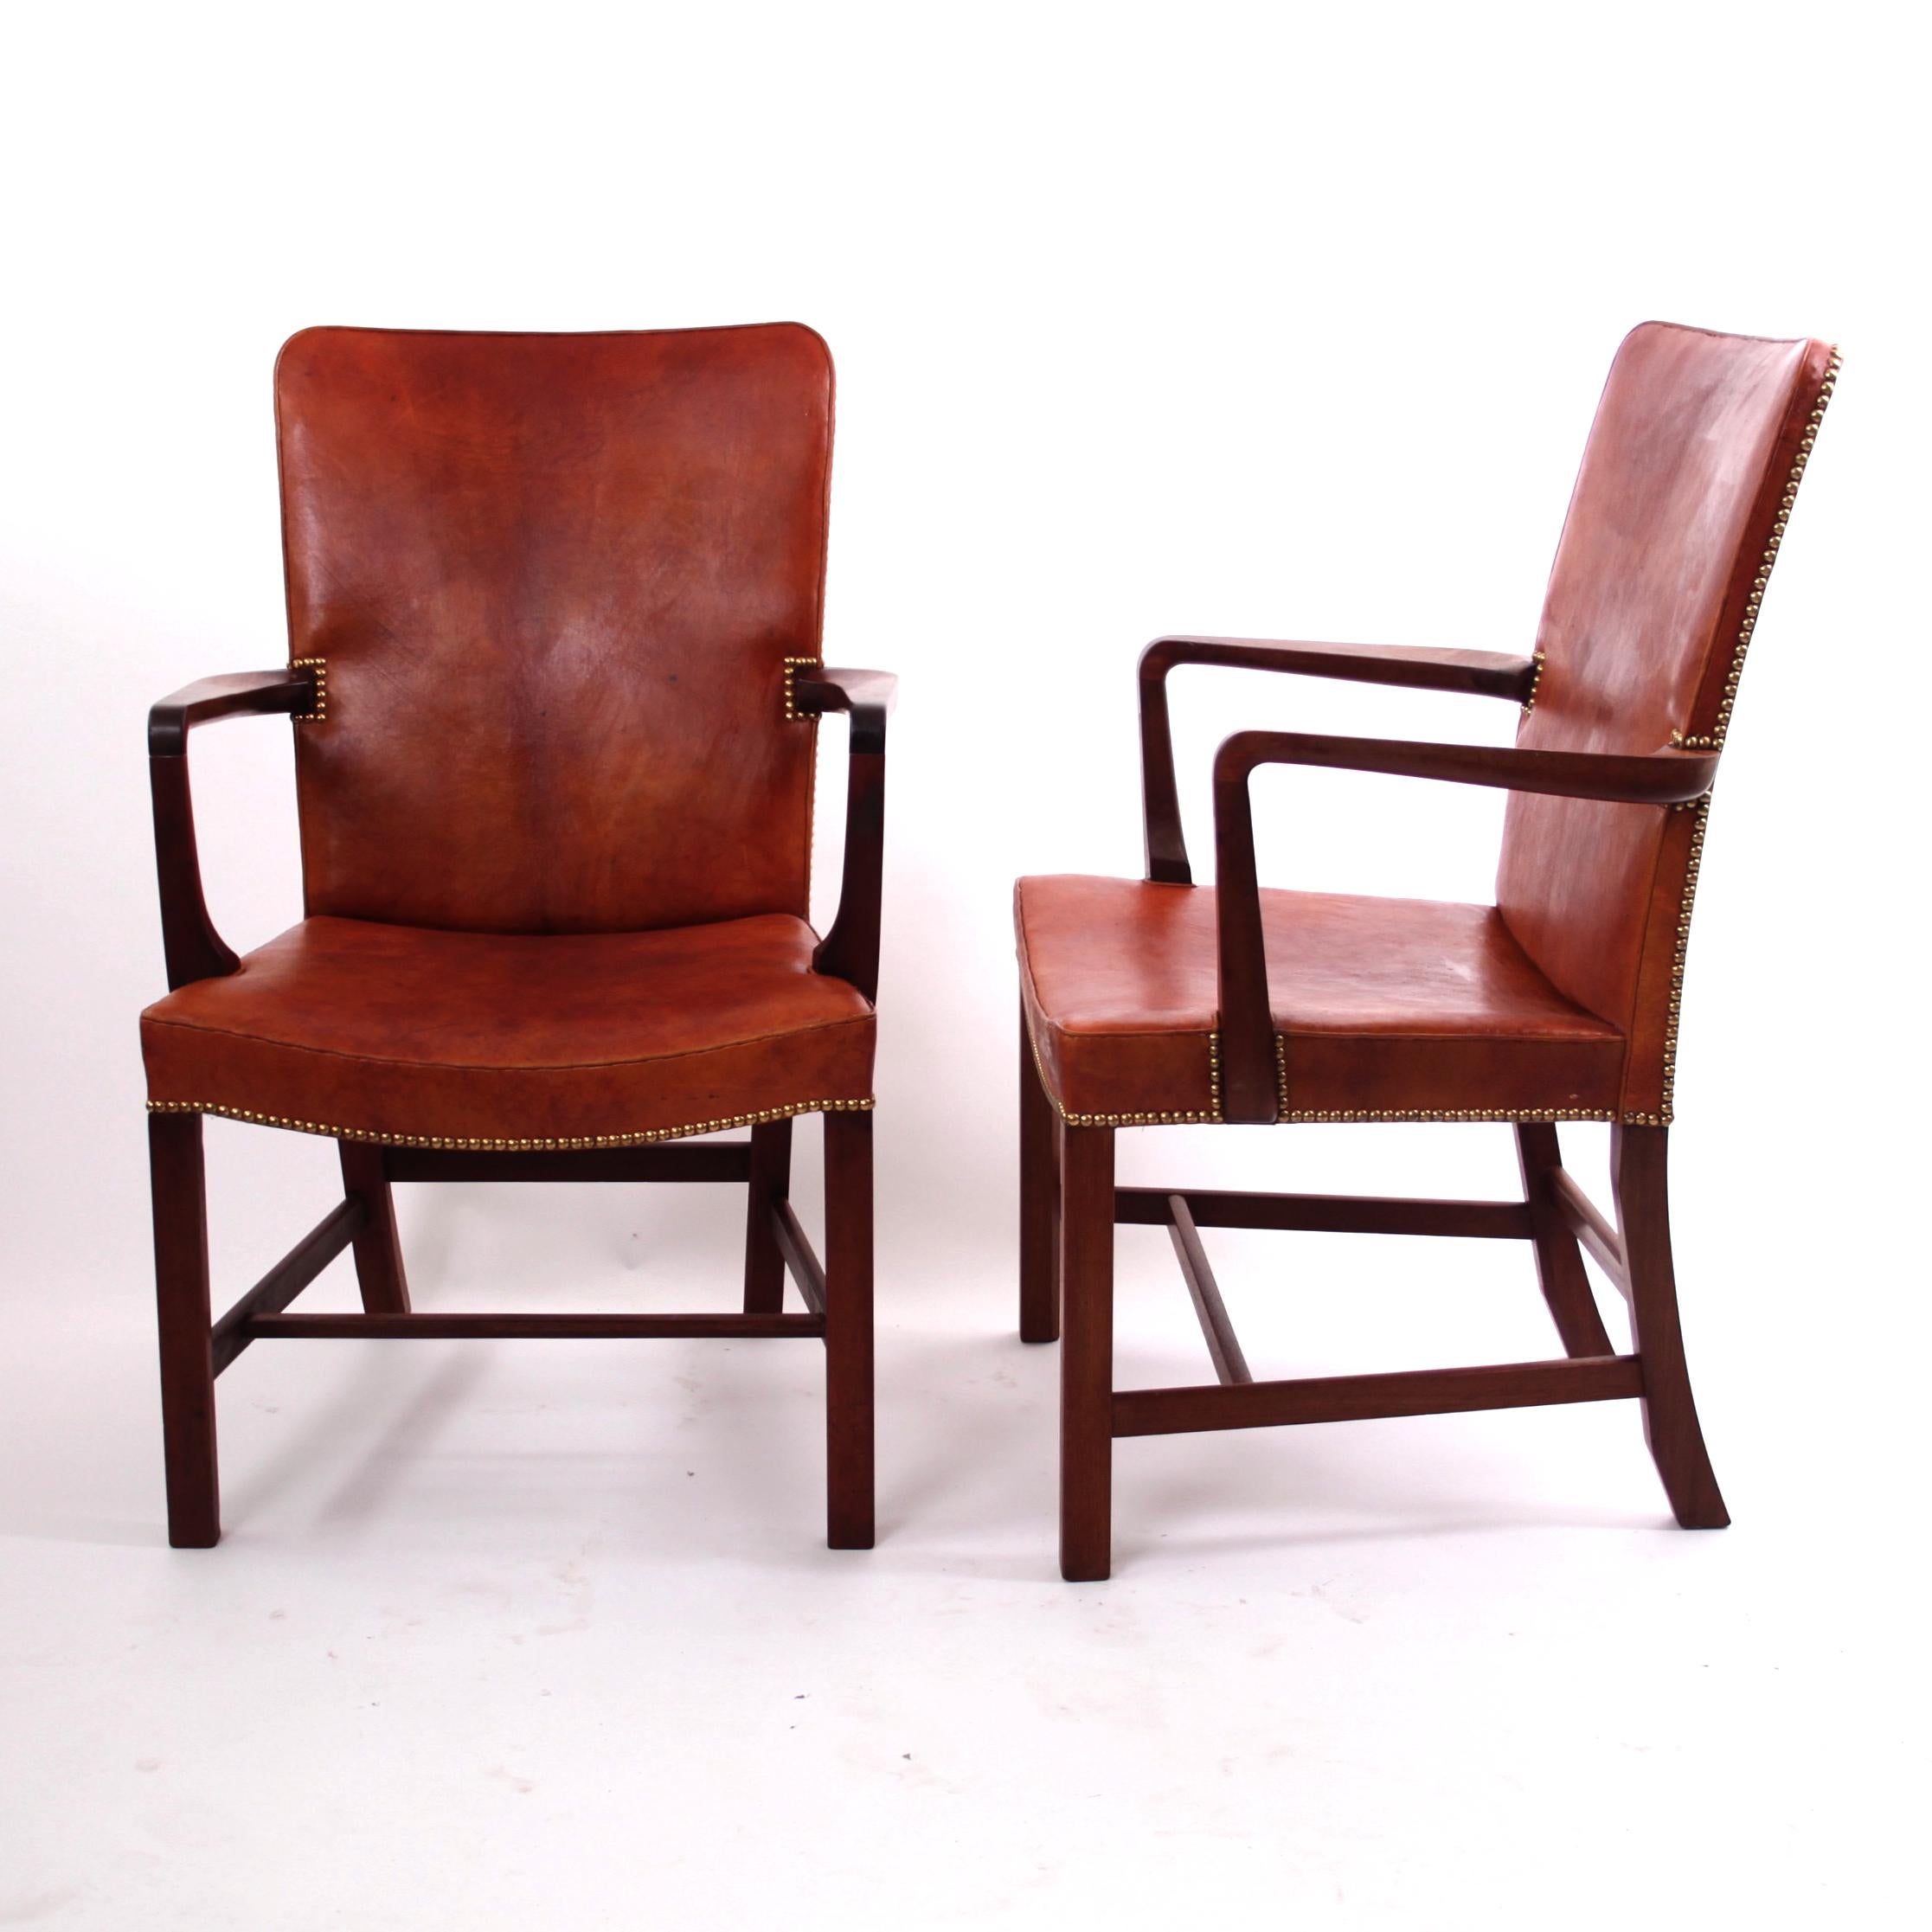 Scandinavian Modern Pair of Kaare Klint 'Nørrevold' Armchairs in Patinated Niger Leather